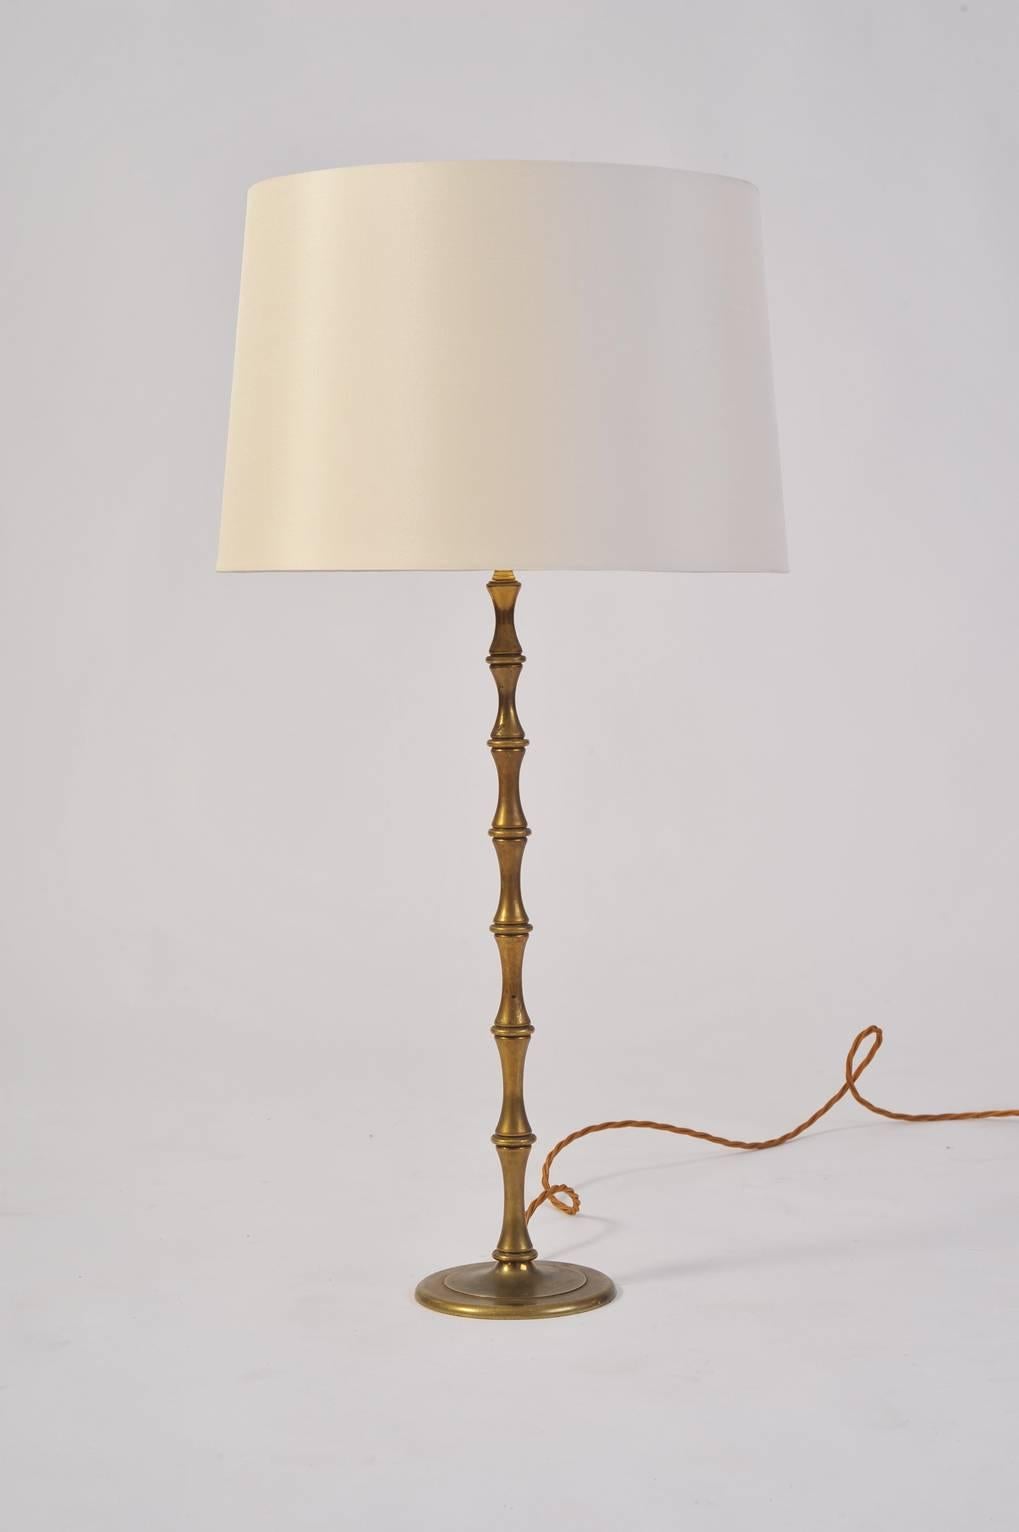 A brass stylized bamboo table lamp
France, circa 1950.